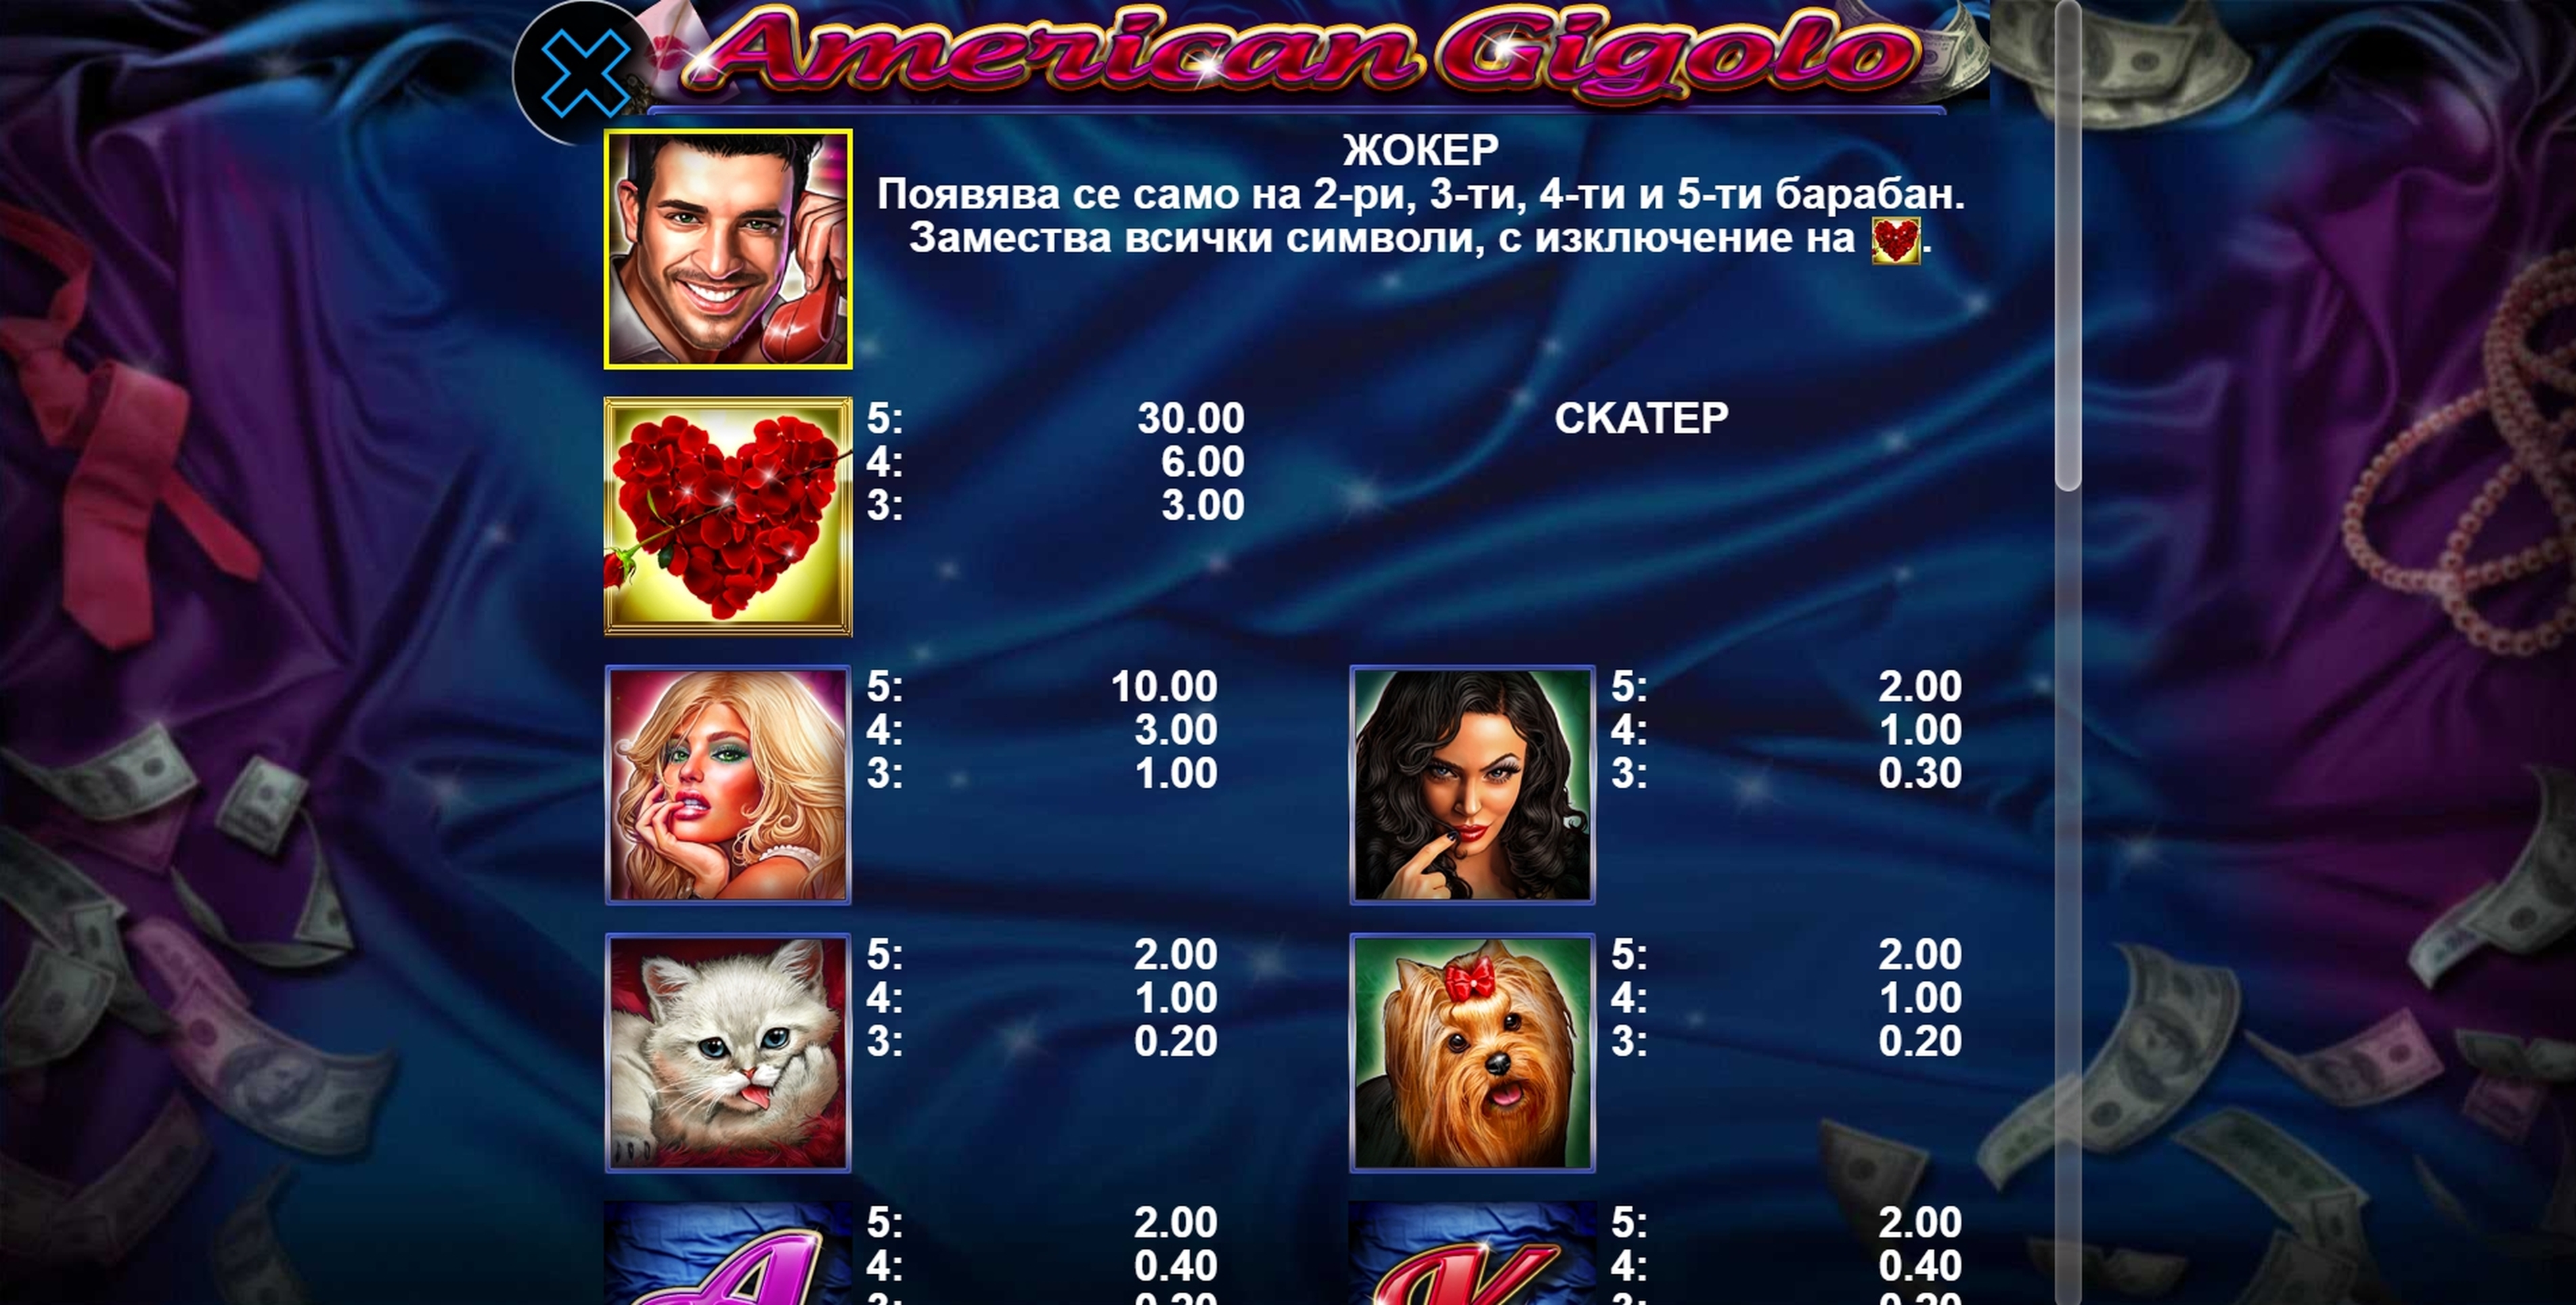 Info of American Gigolo Slot Game by casino technology